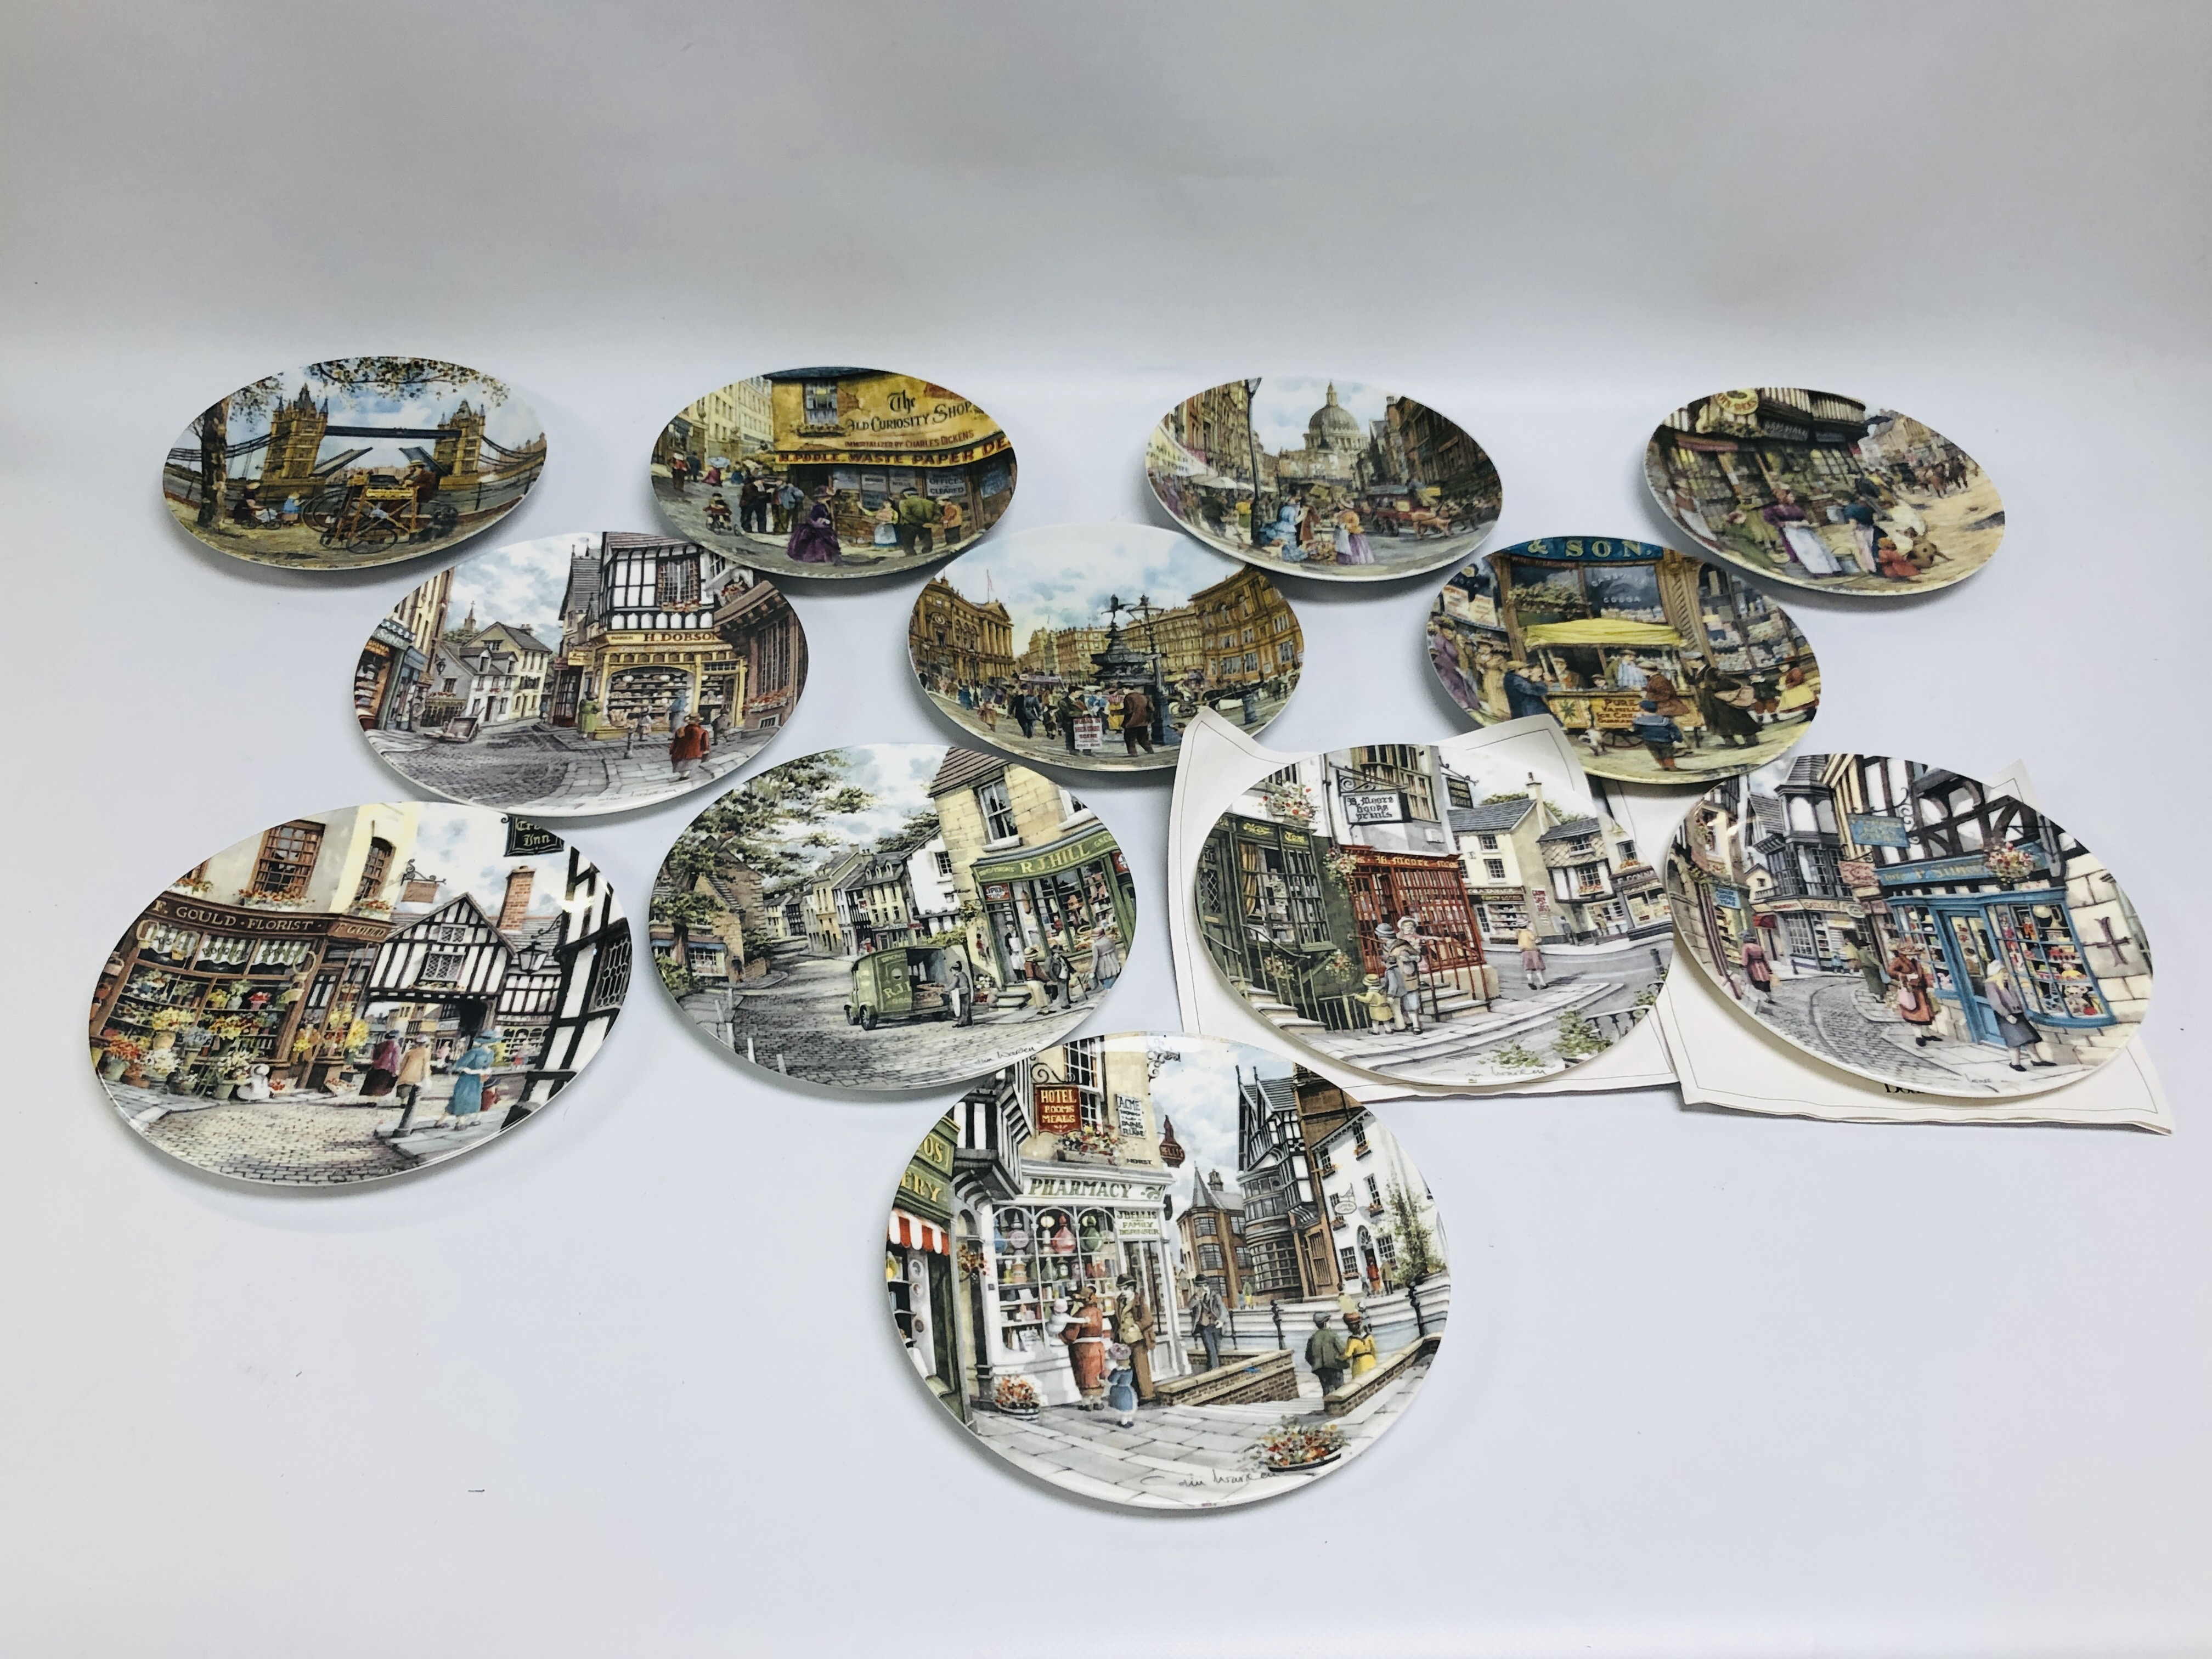 4 X DAVENPORT COLLECTORS PLATES "CRIES OF LONDON" SERIES WITH BOXES + 2 WITHOUT BOXES + 6 X ROYAL